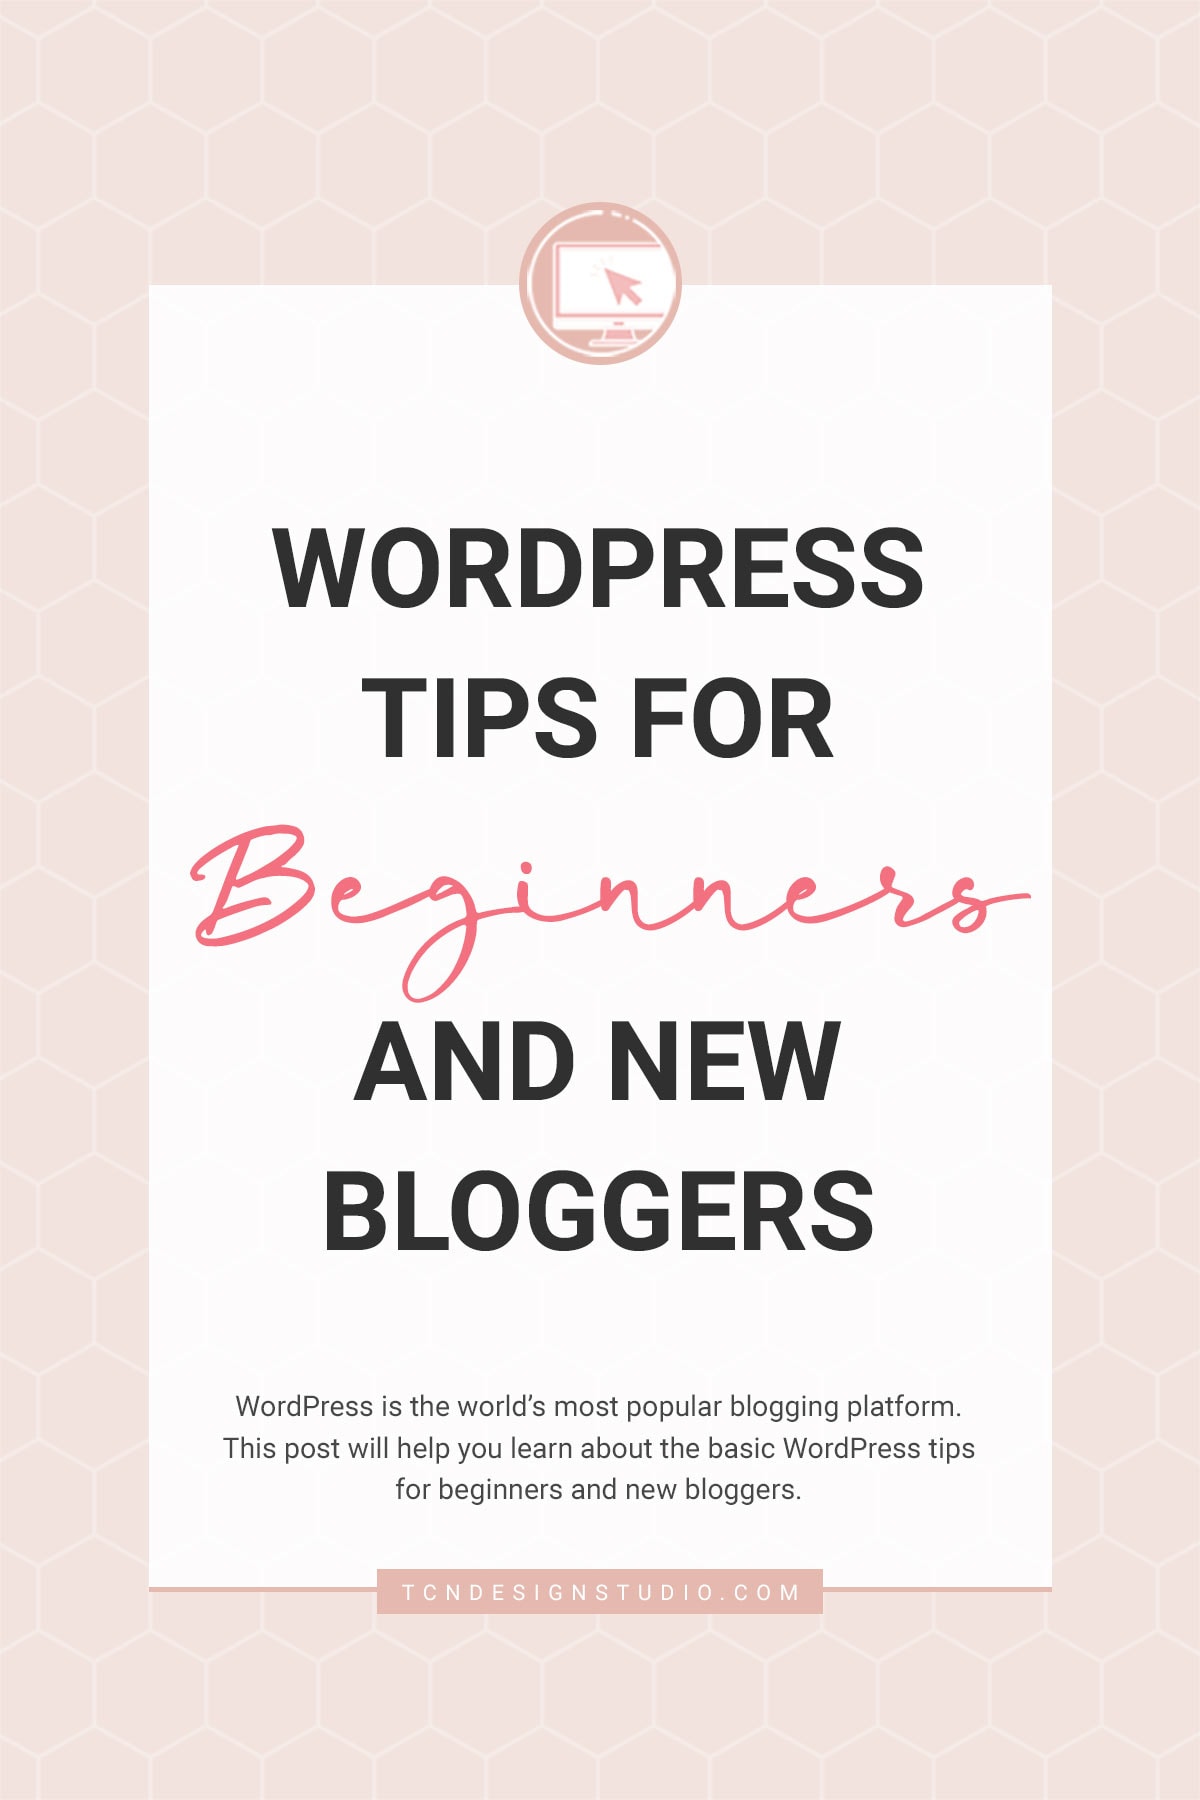 WordPress tips for beginners and new bloggers Cover Image patterned background with Title text overlay